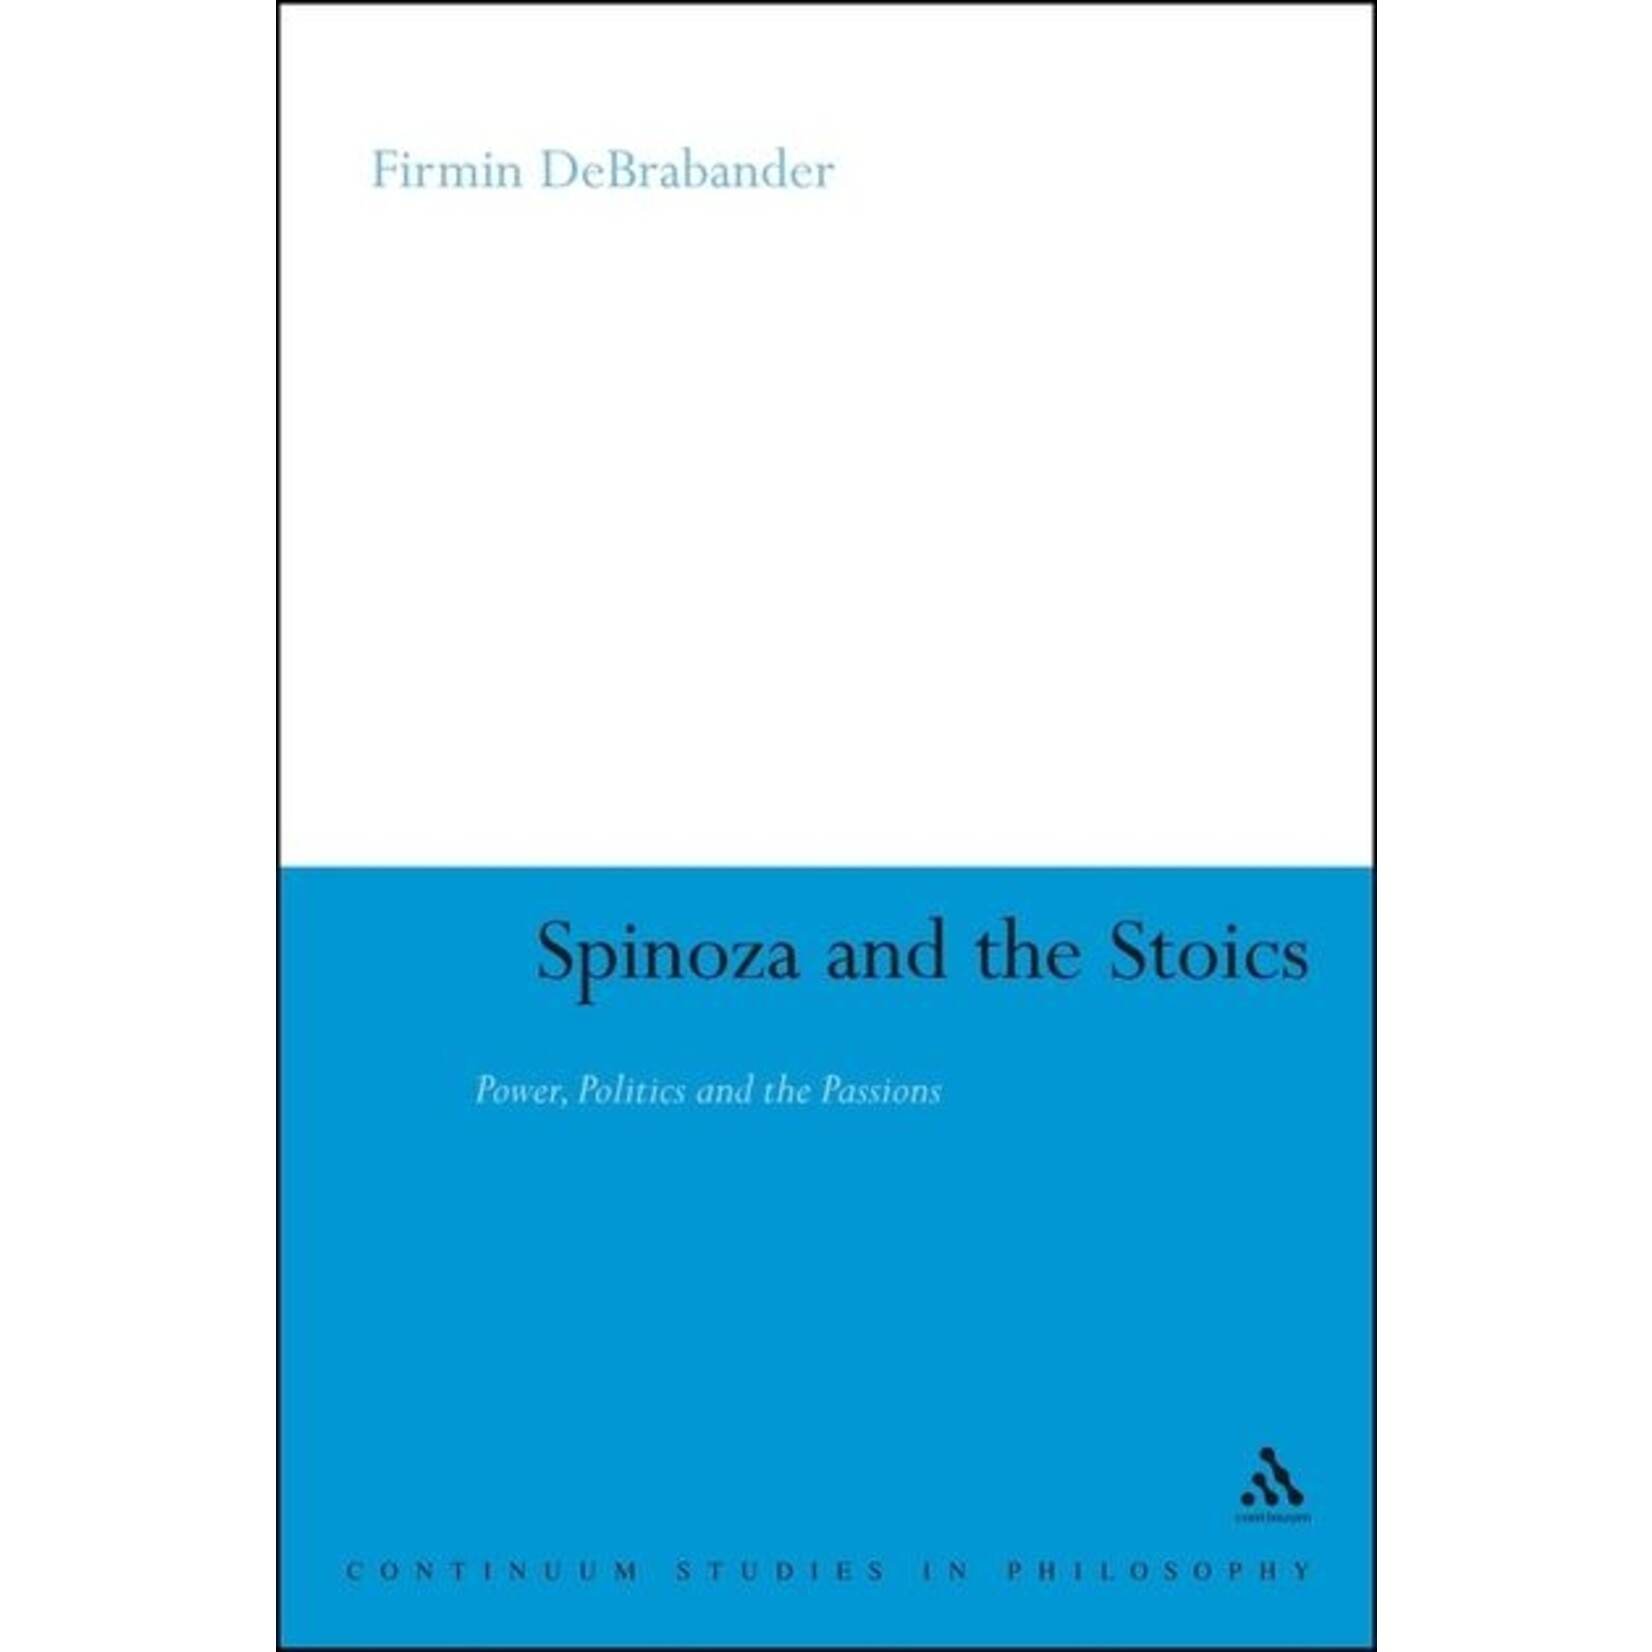 Spinoza and the Stoics: Power, Politics and the Passions ( Continuum Studies in Philosophy #64 )